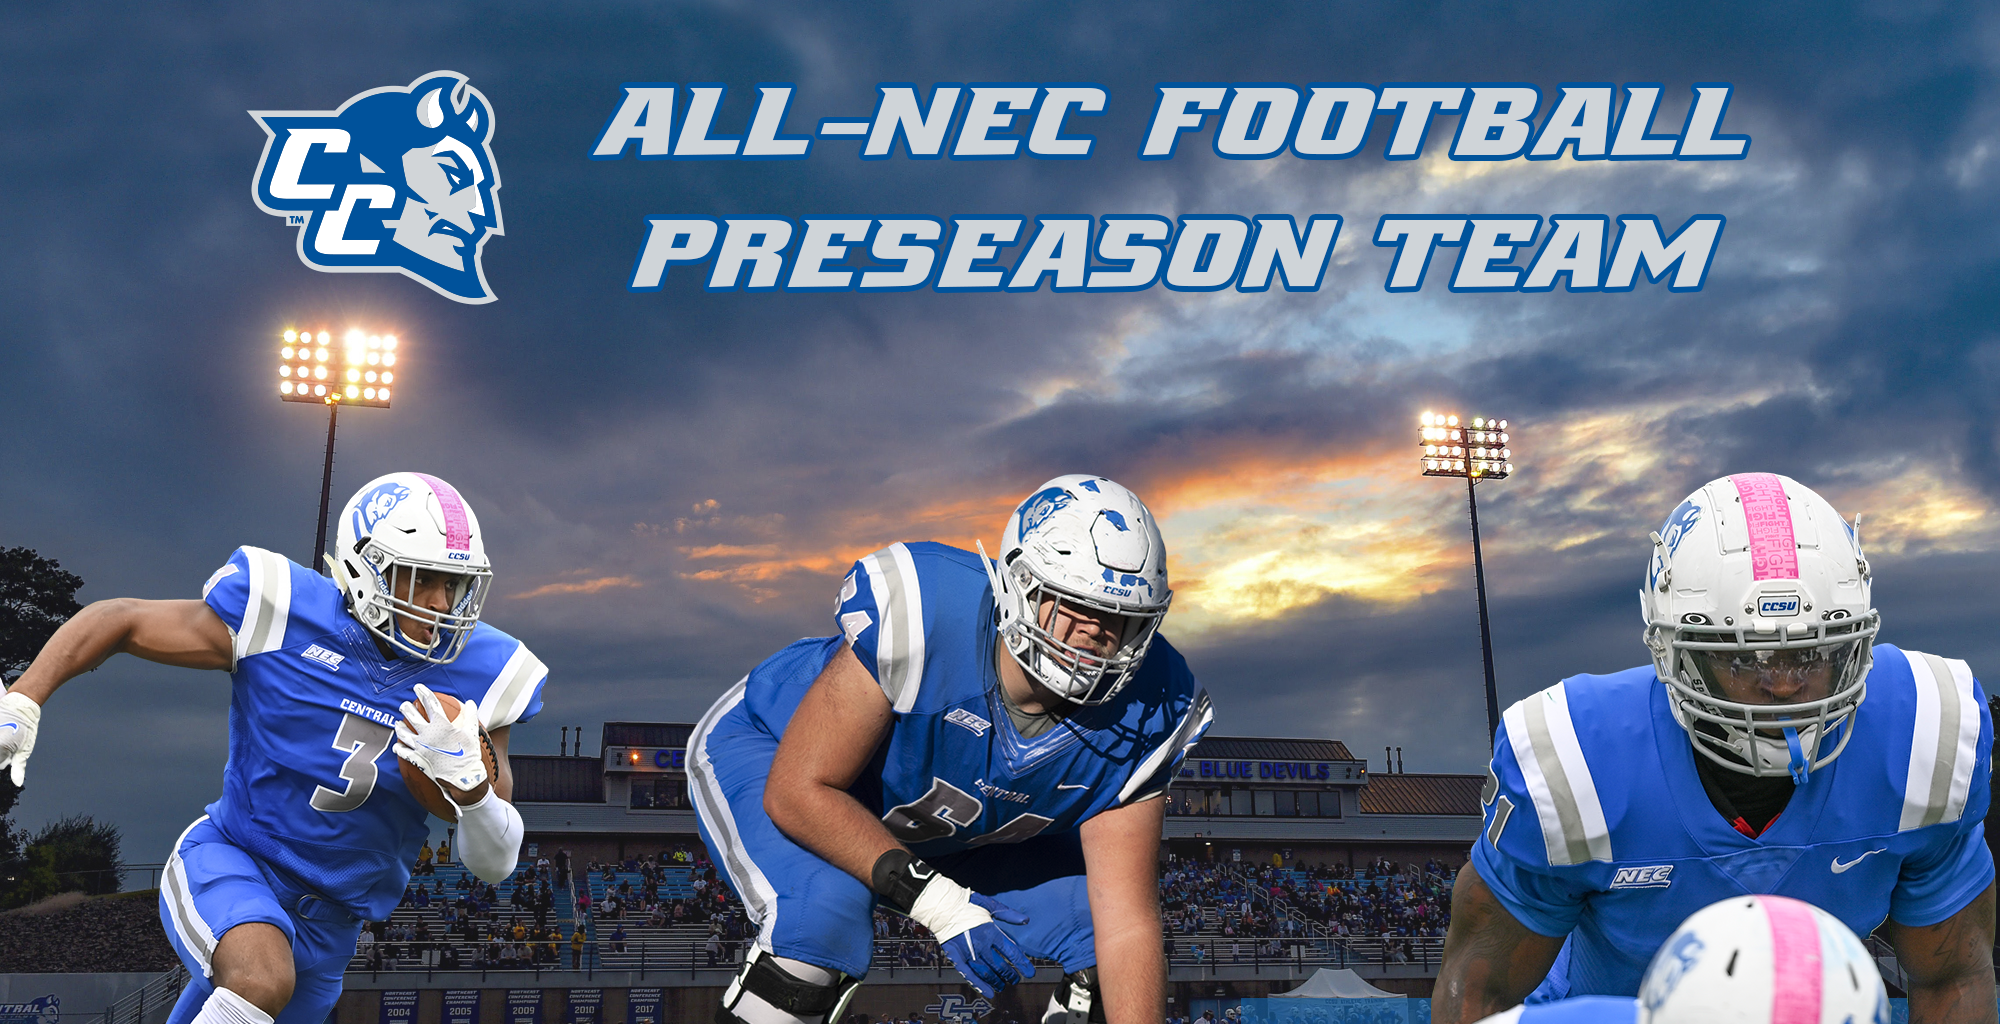 Jonathan Cabral-Martin, Chizi Umunakwe and Craig Wood were selected to the All-NEC Preseason Team that was announced August 3rd on ESPN3. (Photos: Steve McLaughlin Photography)